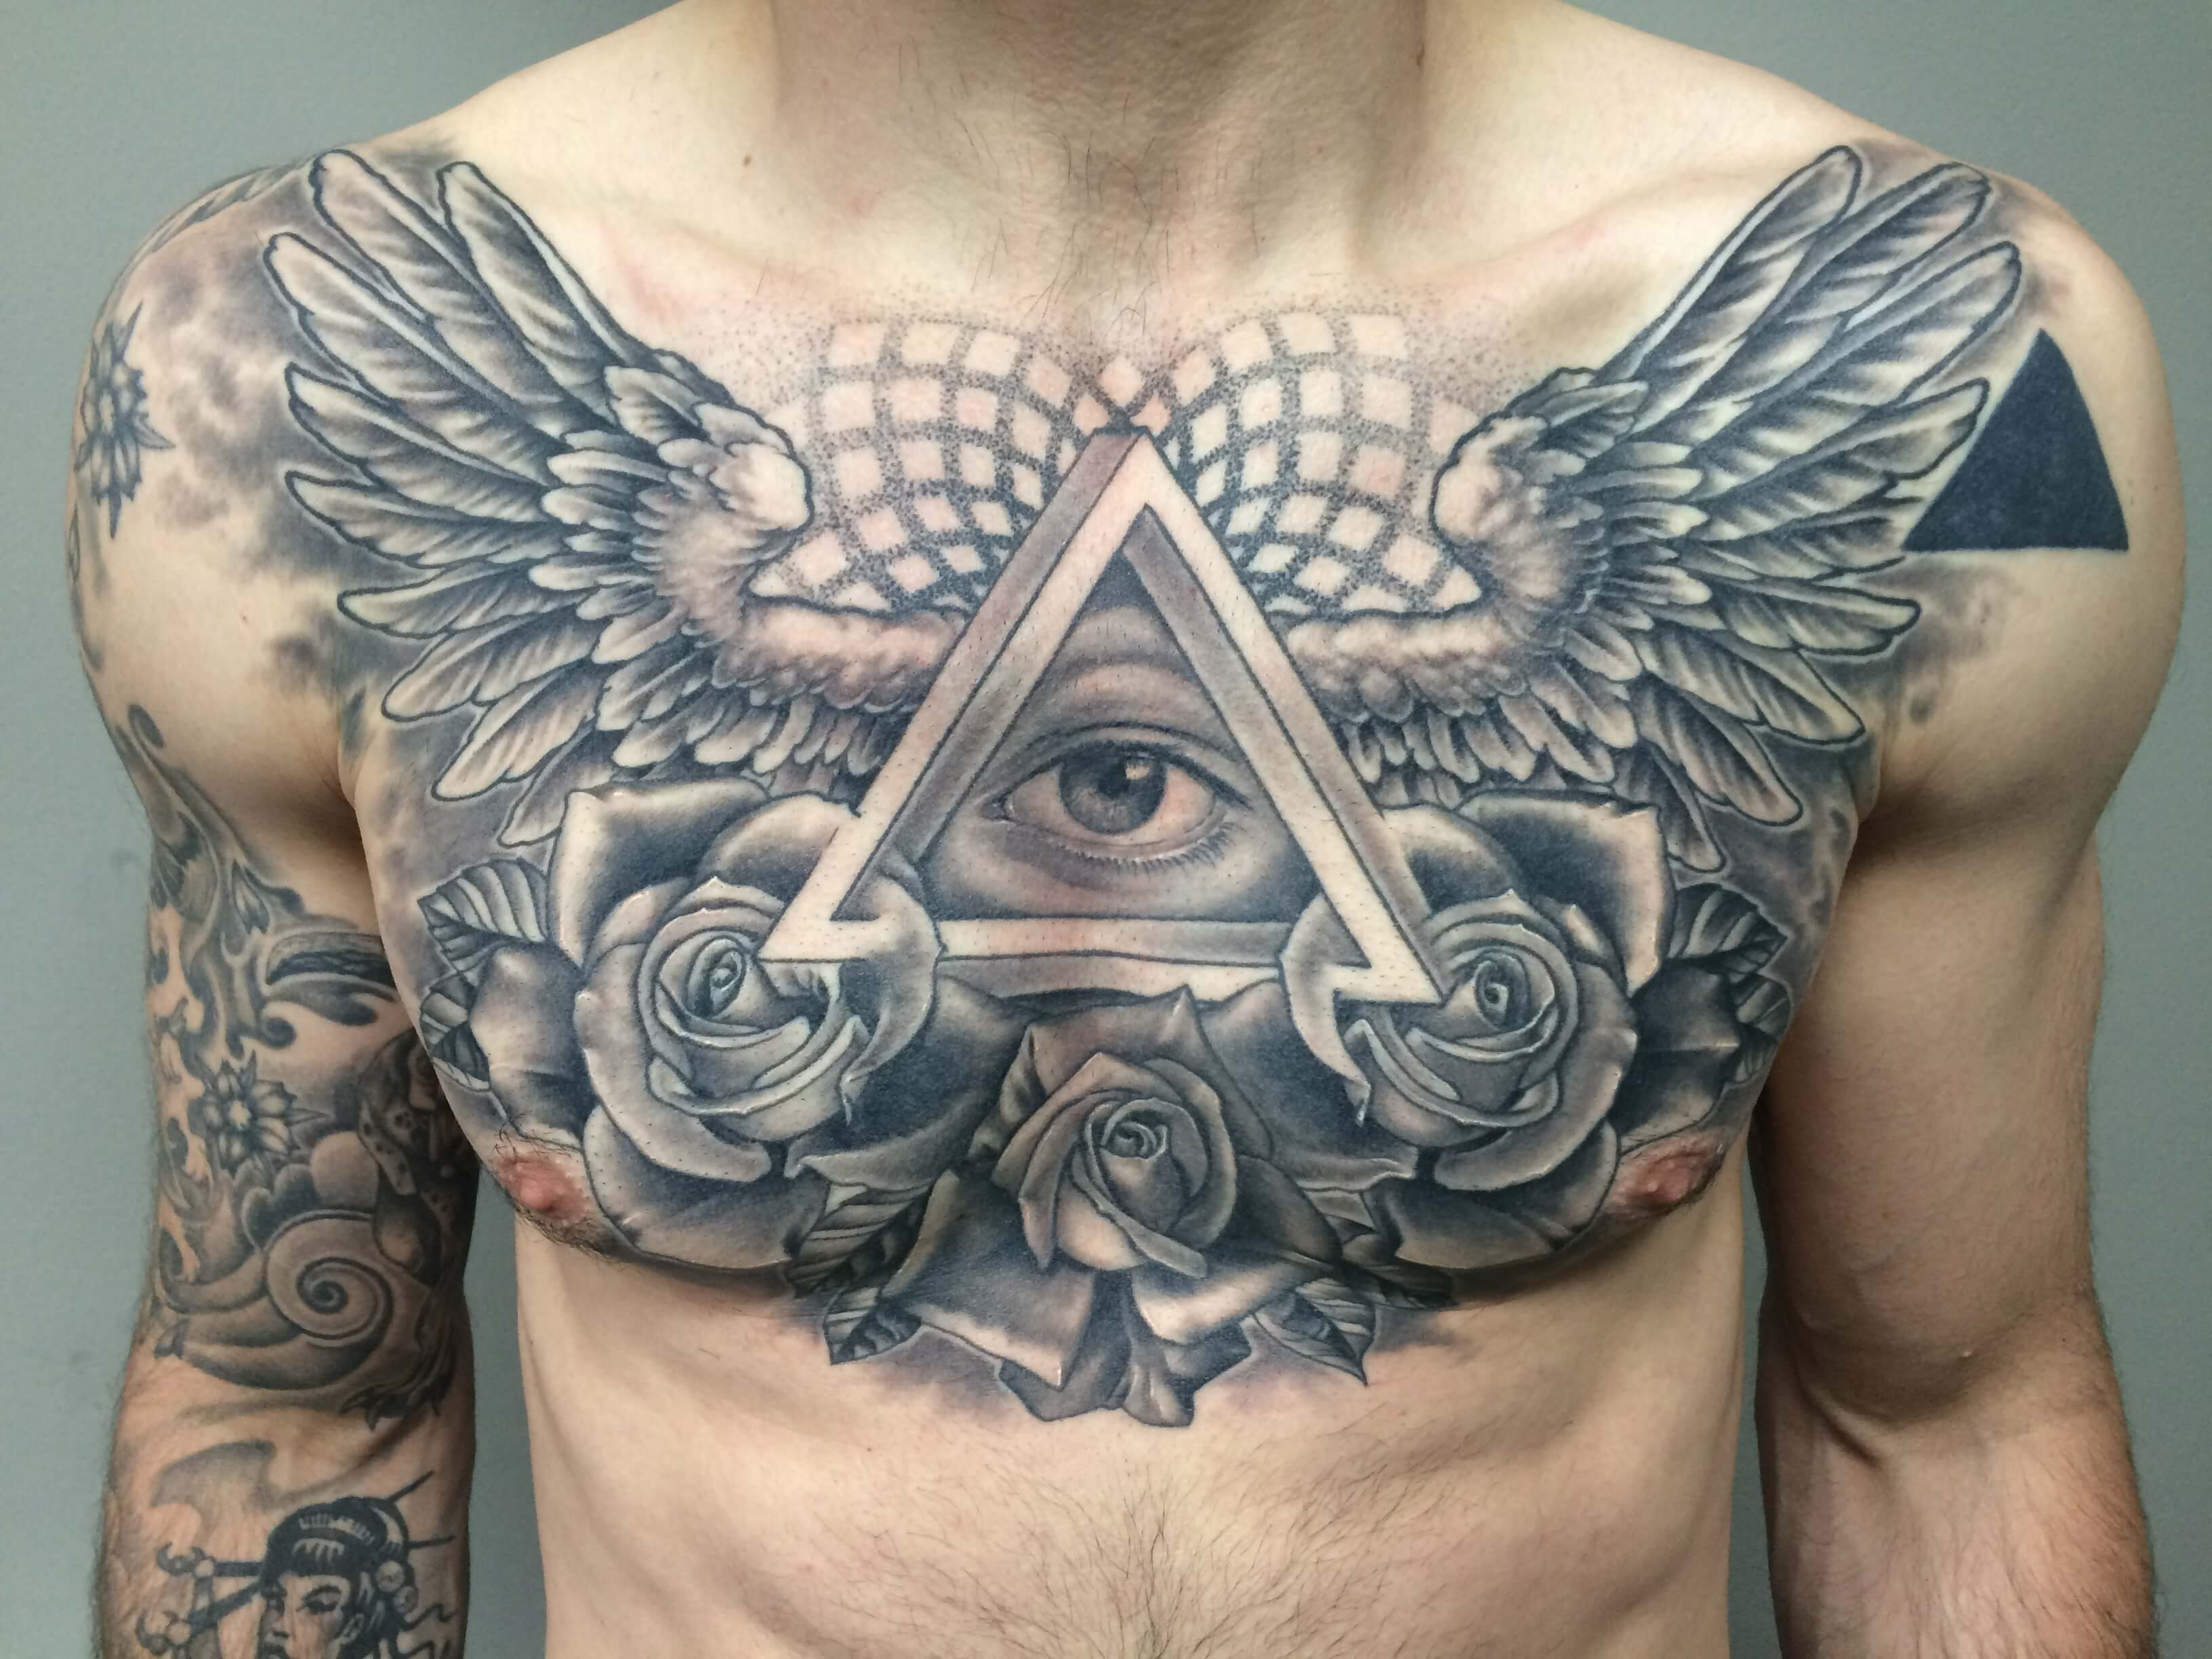 The 100 Best Chest Tattoos For Men Improb in measurements 3264 X 2448